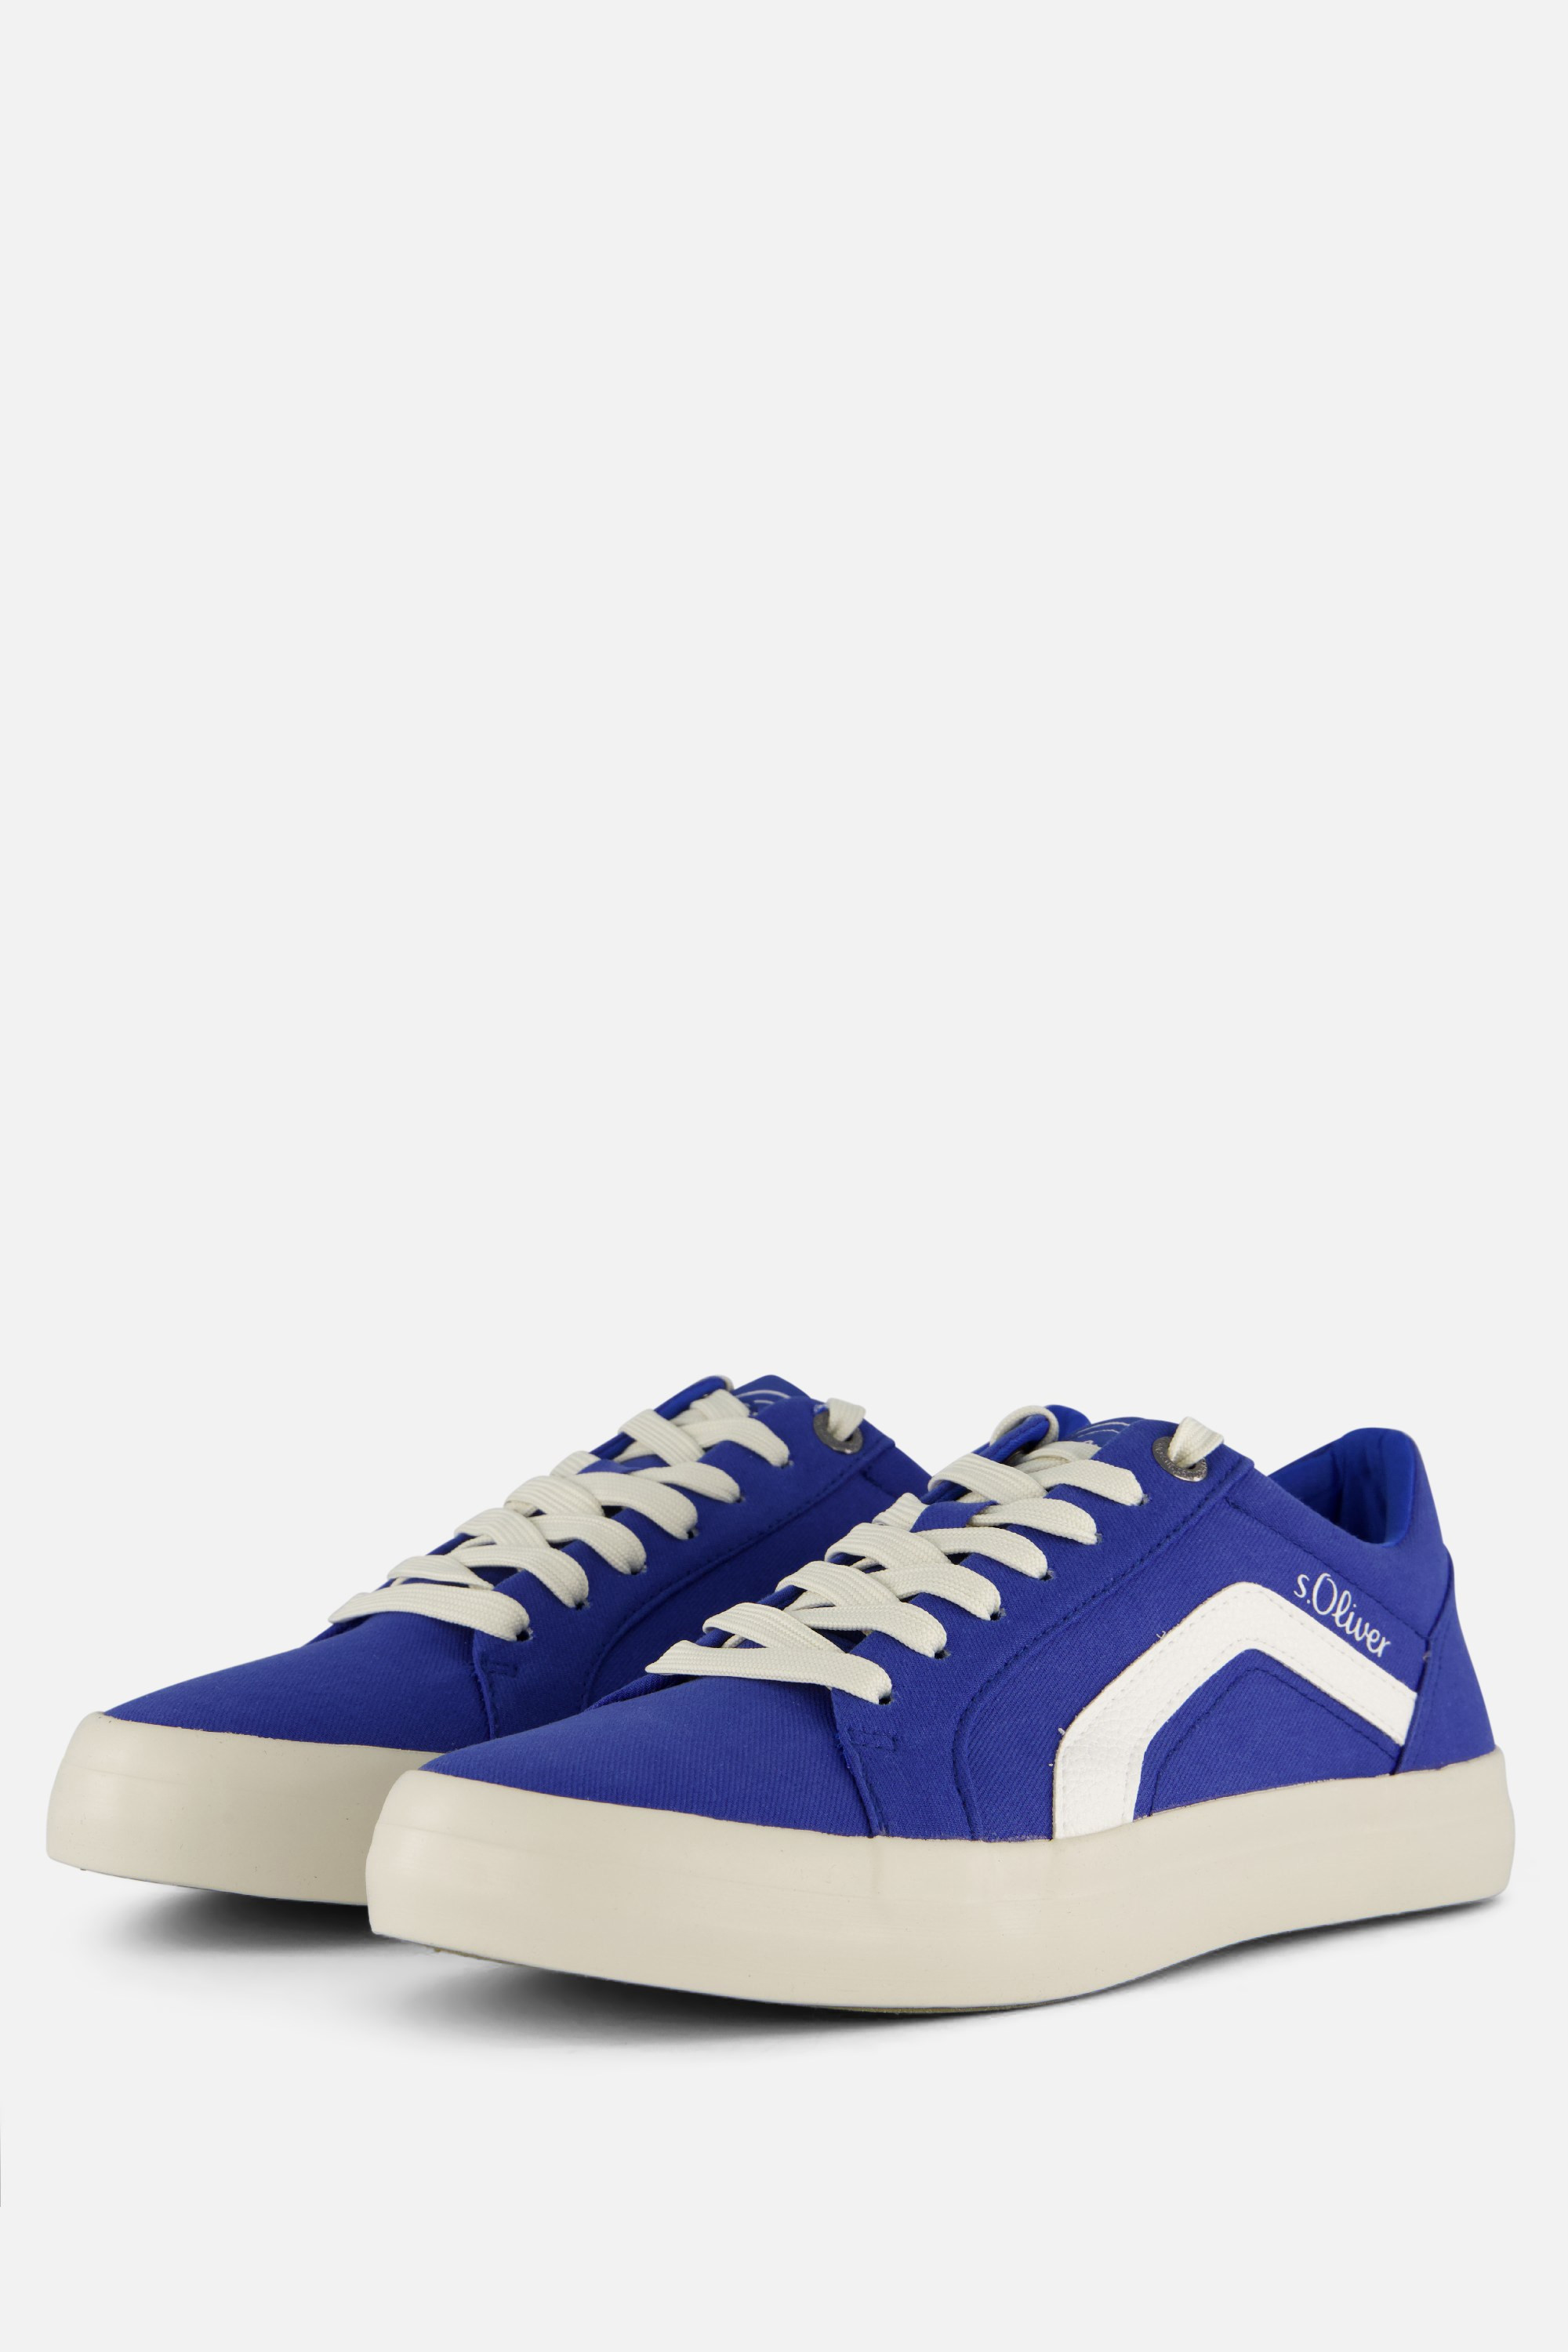 S.Oliver S.Oliver Sneakers blauw Synthetisch